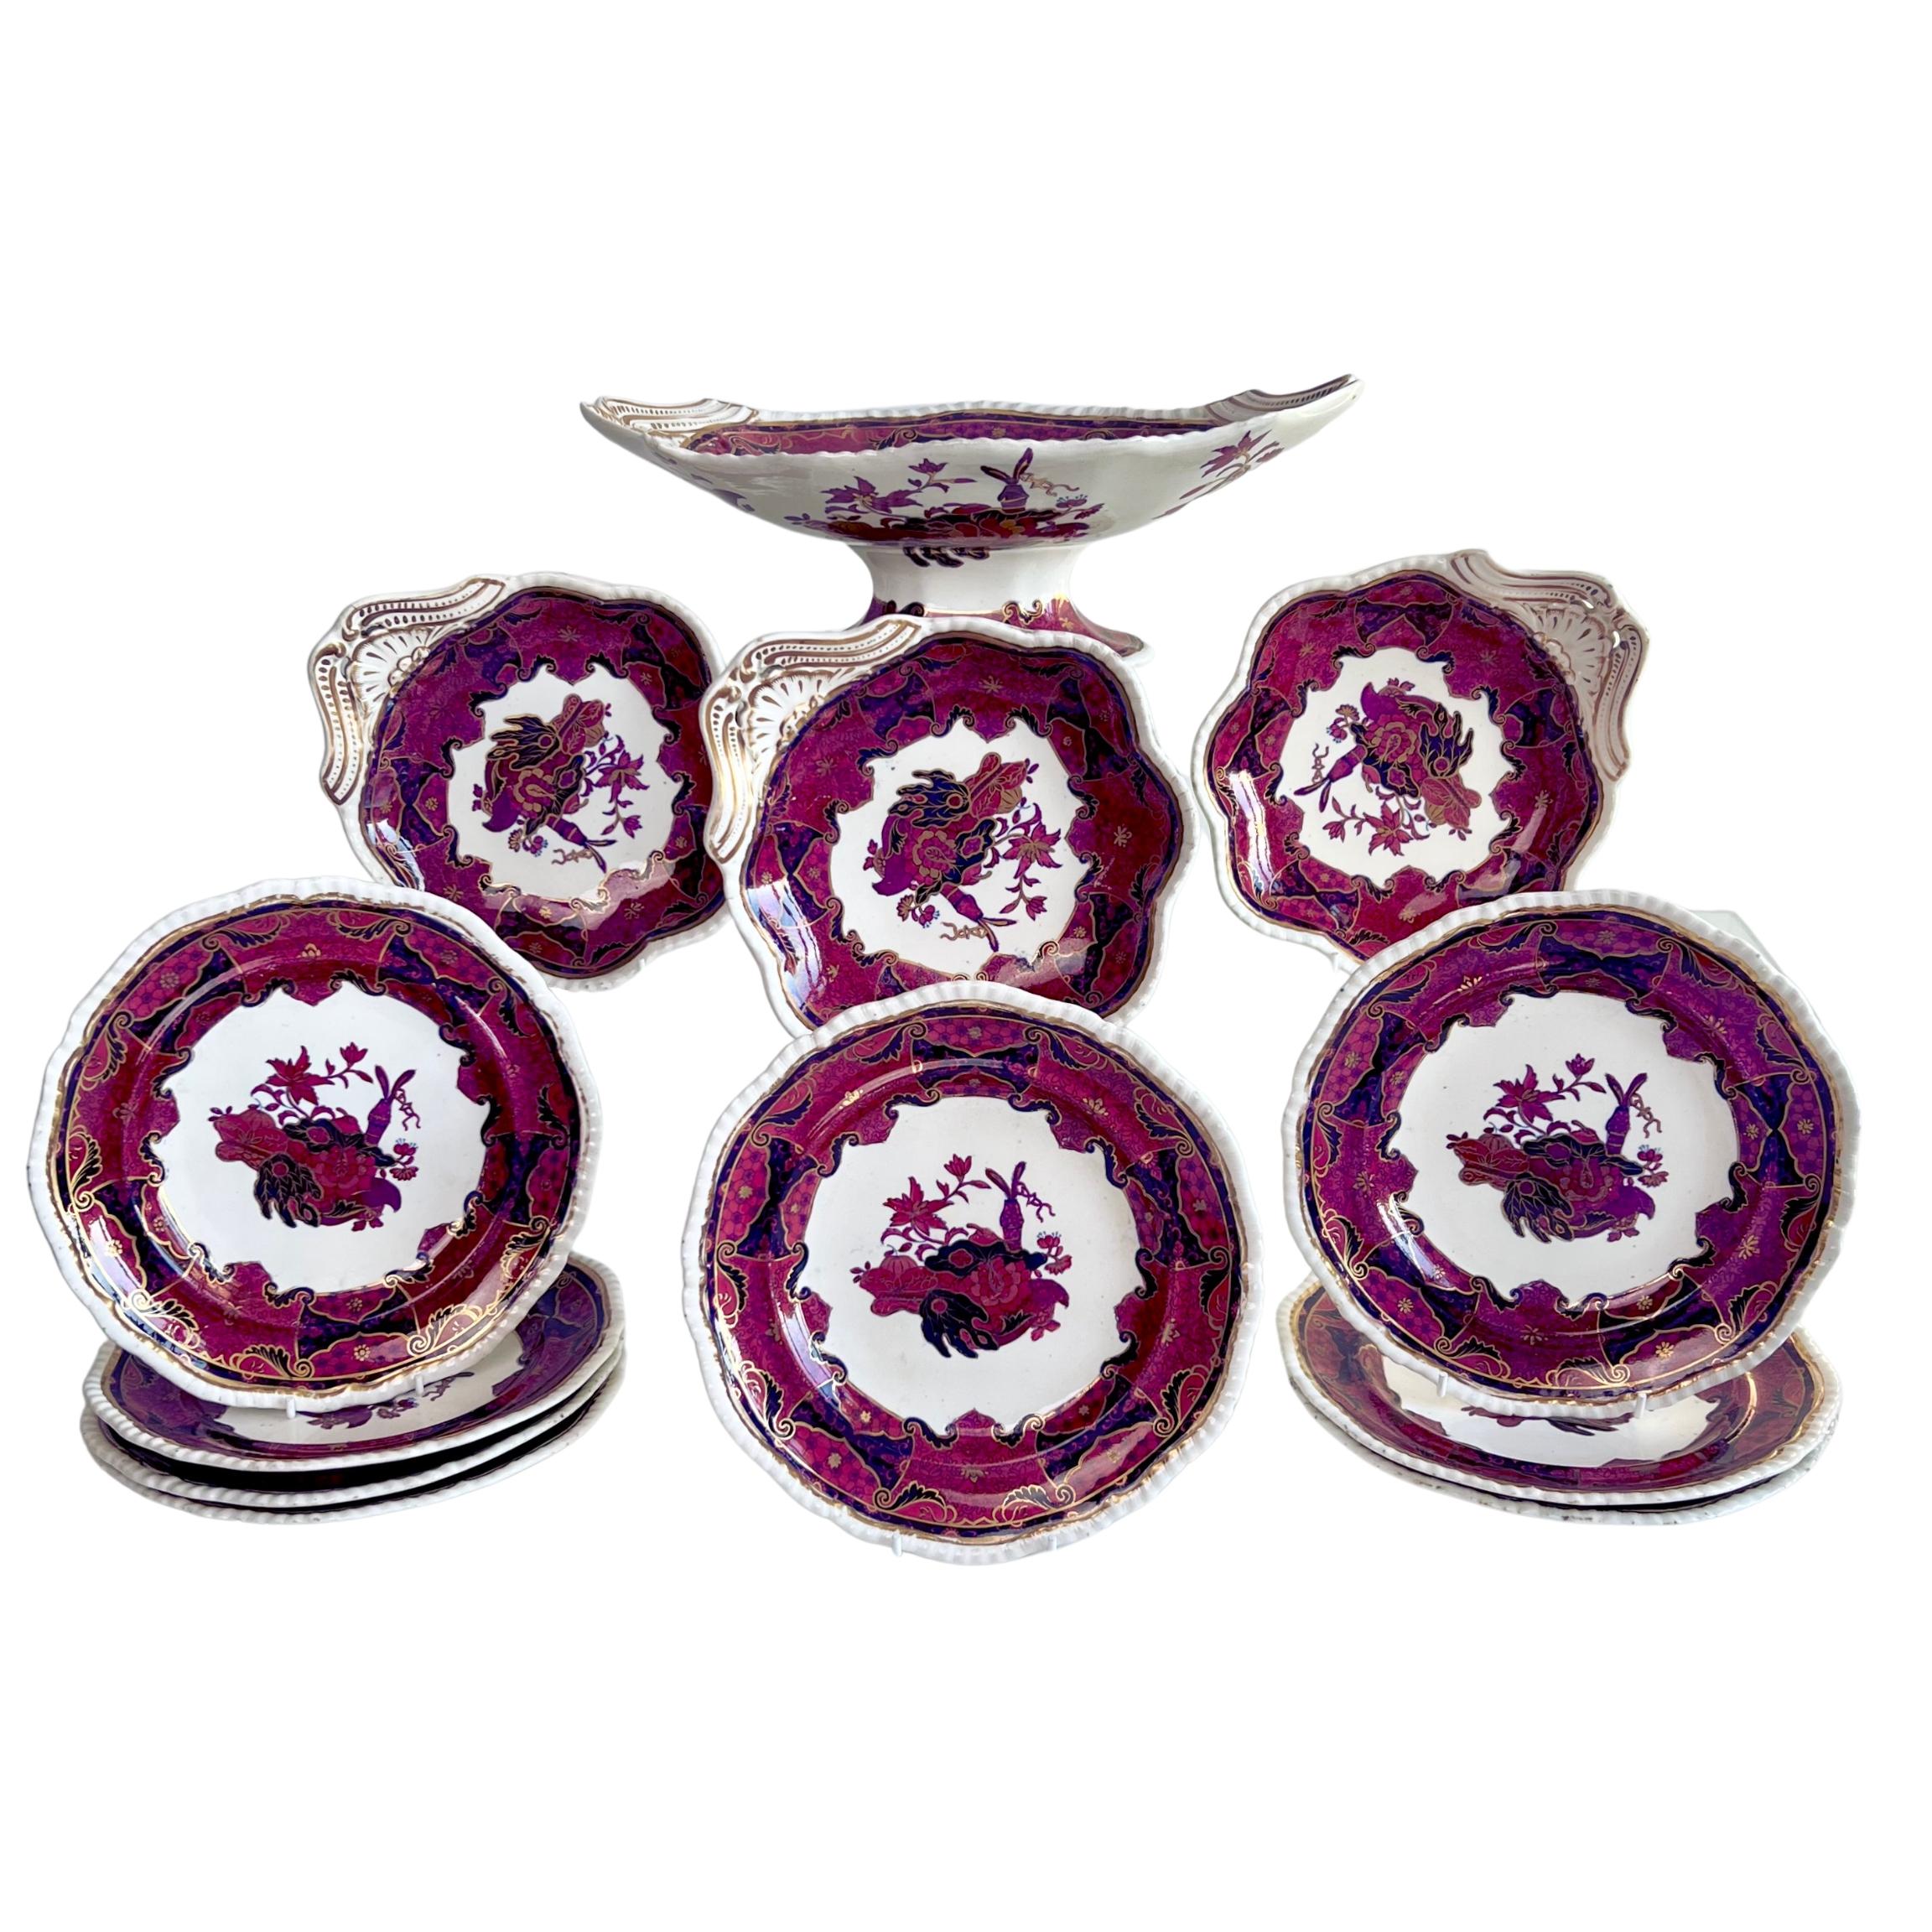 Spode Imperial China Dessert Service, Frog Pattern in Mauve, Regency circa 1828 For Sale